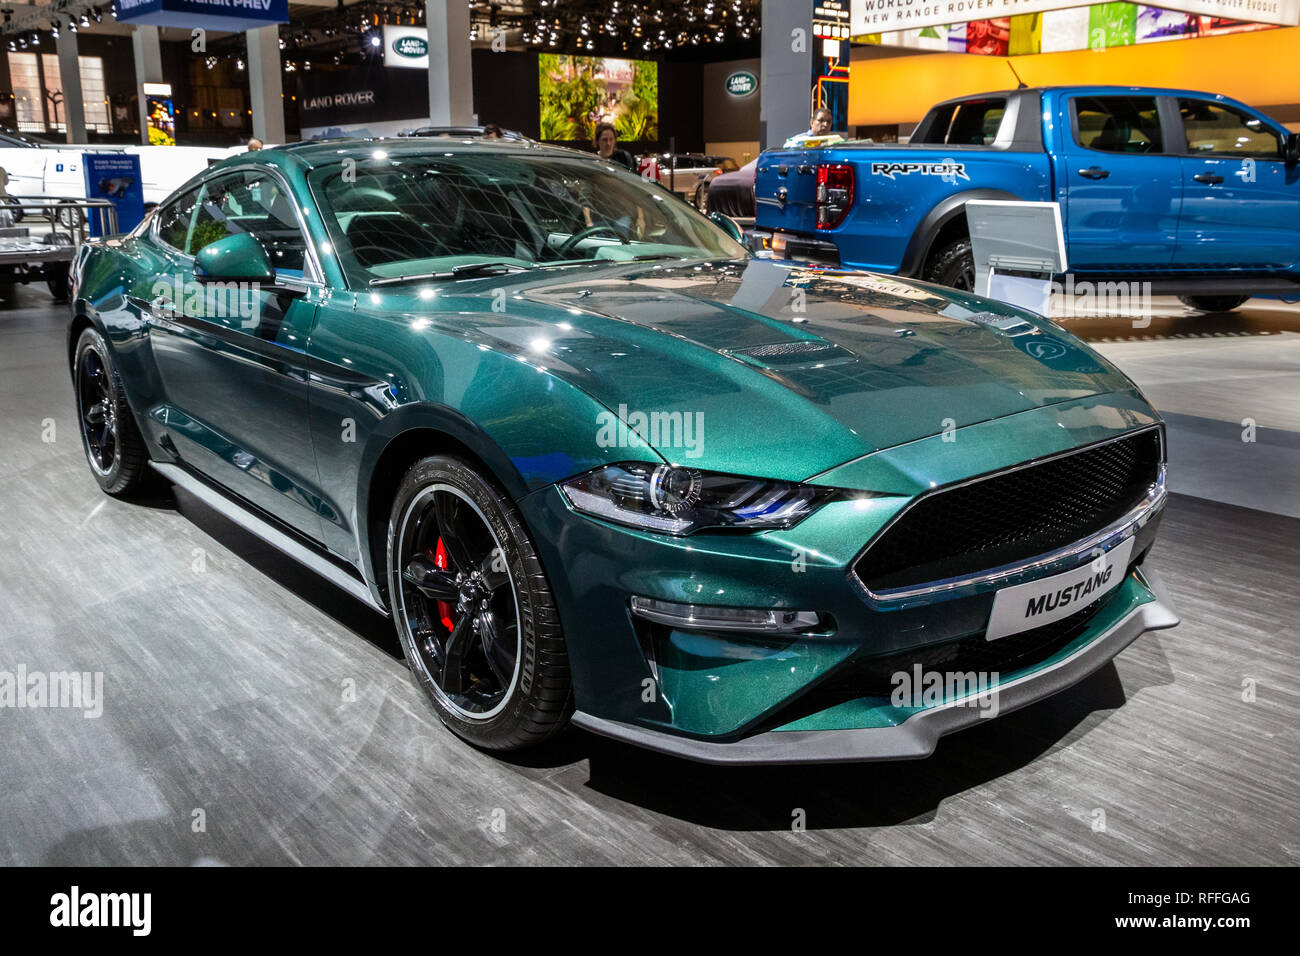 BRUSSELS - JAN 18, 2019: Ford Mustang sports car showcased at the 97th Brussels Motor Show 2019 Autosalon. Stock Photo